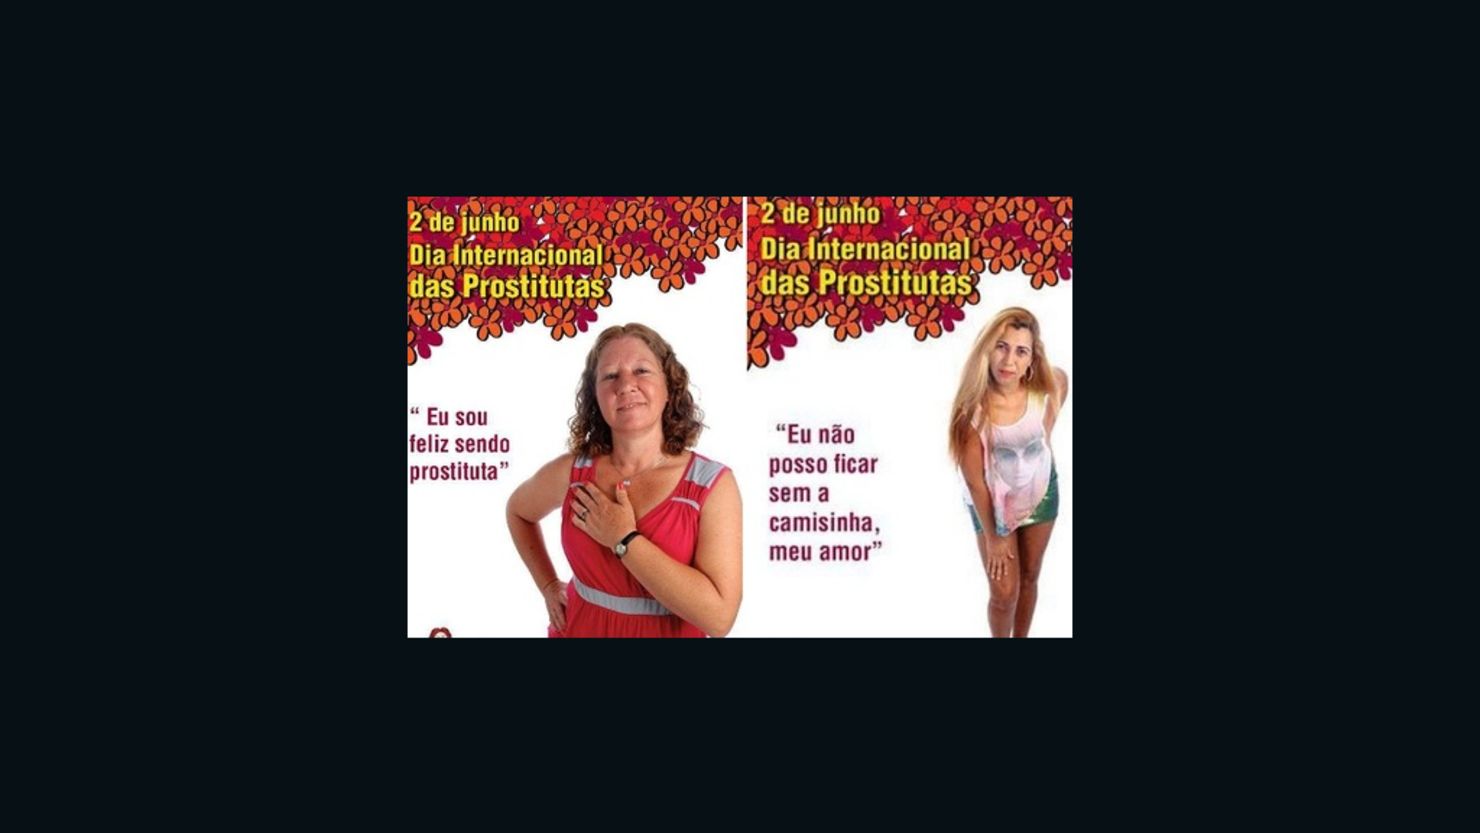 Poster from the campaign for the International Day of Prostitutes features the phrase "I am happy being a prostitute."